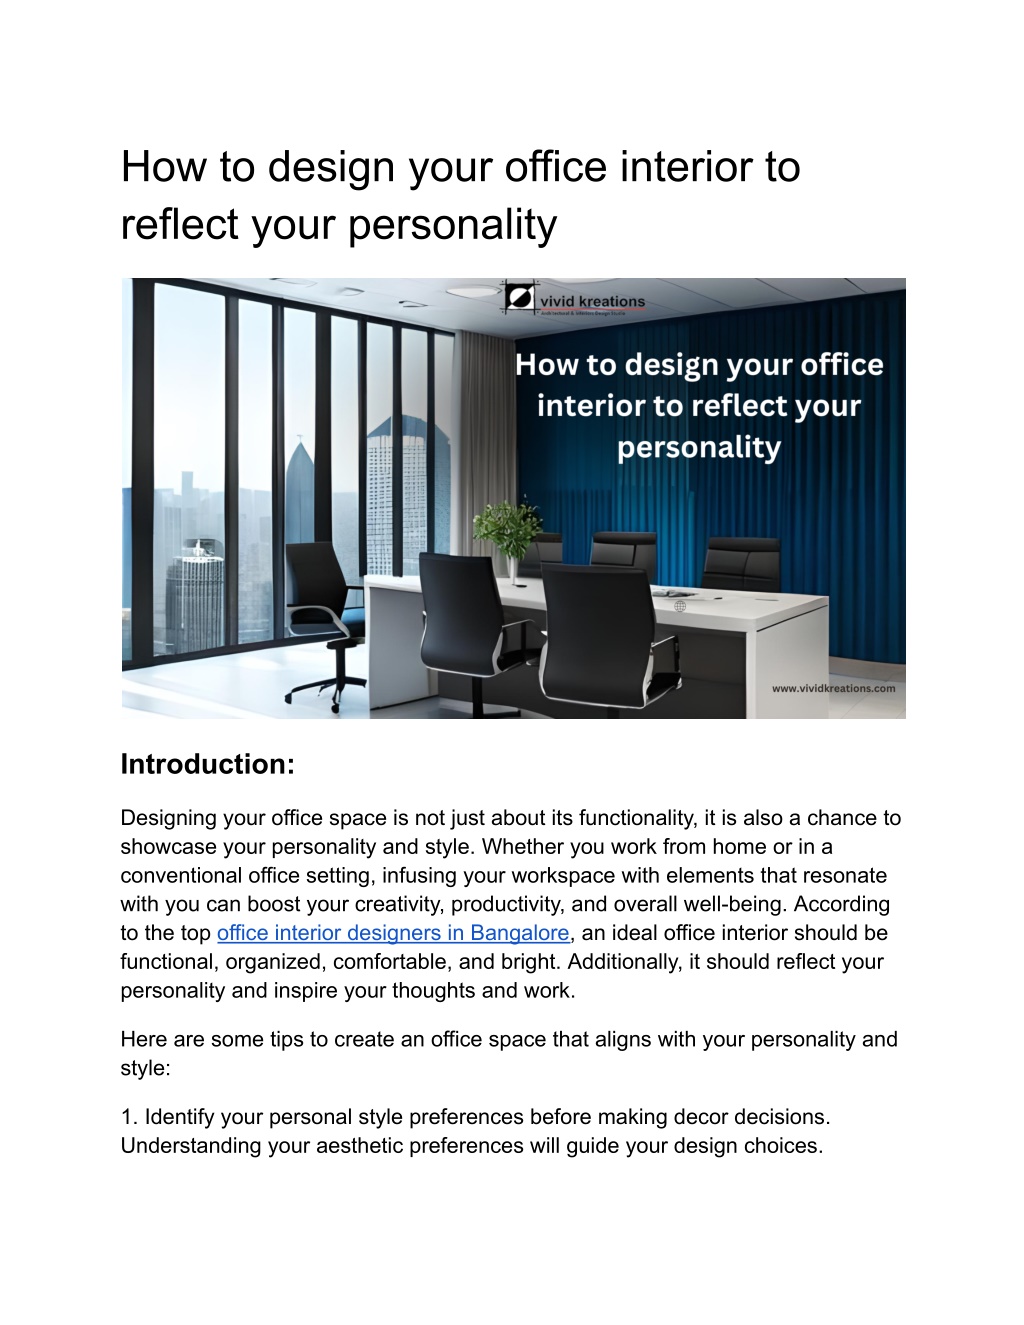 PPT - How to design your office interior to reflect your personality ...